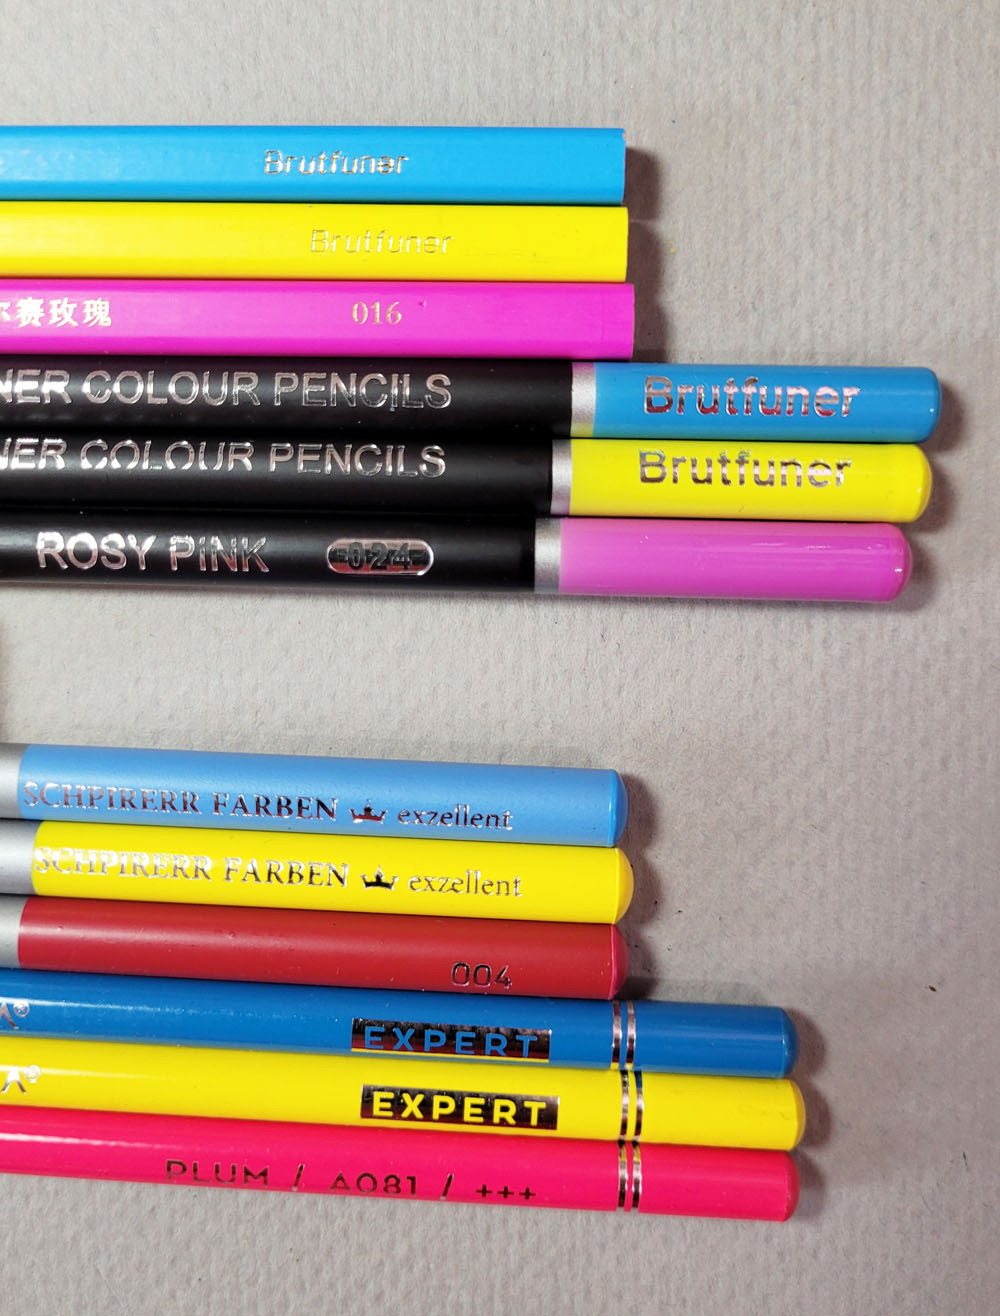 My new huge set of colored pencils SOUCOLOR 180. Are they similar